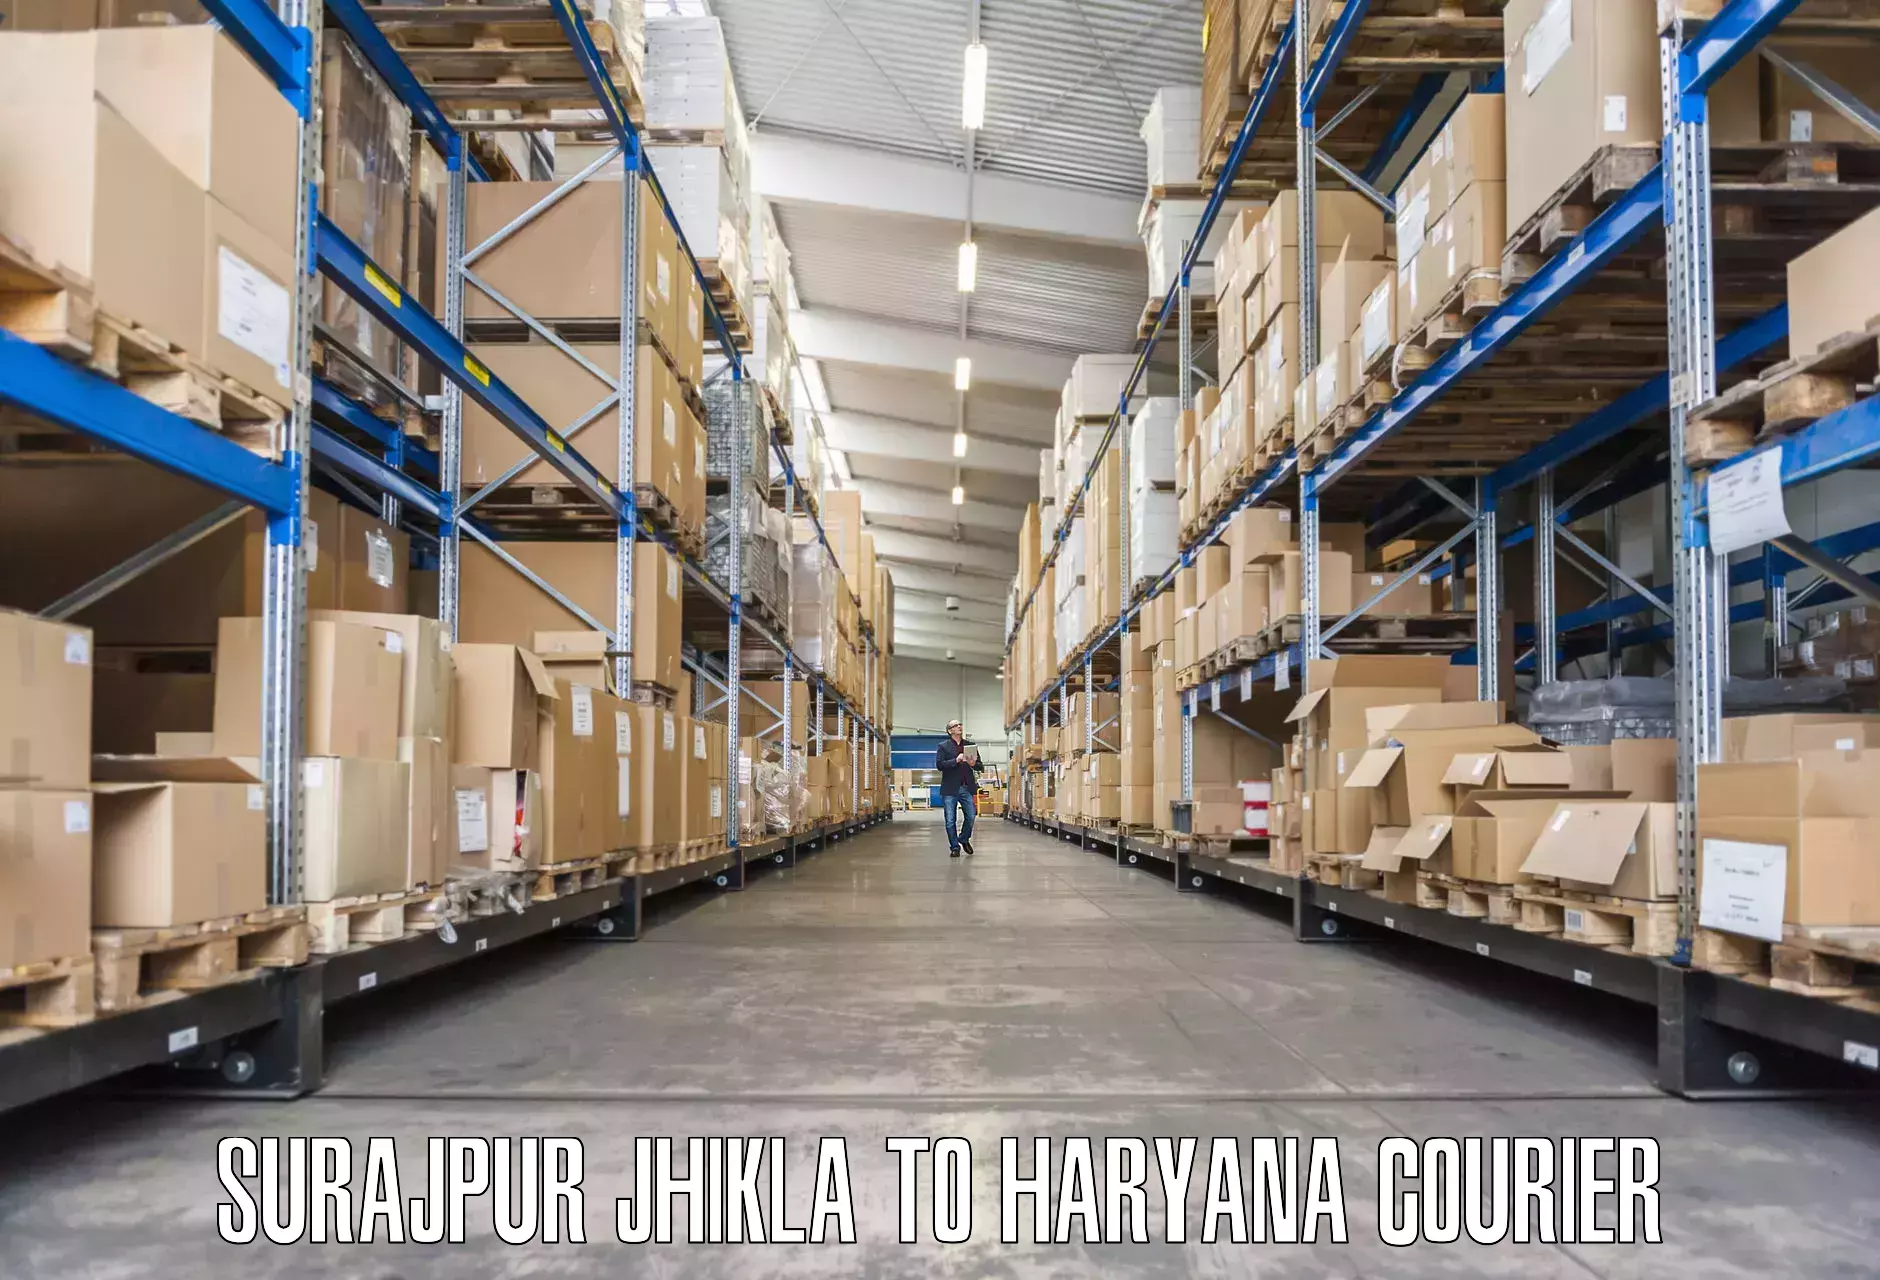 Moving and handling services in Surajpur Jhikla to Gohana